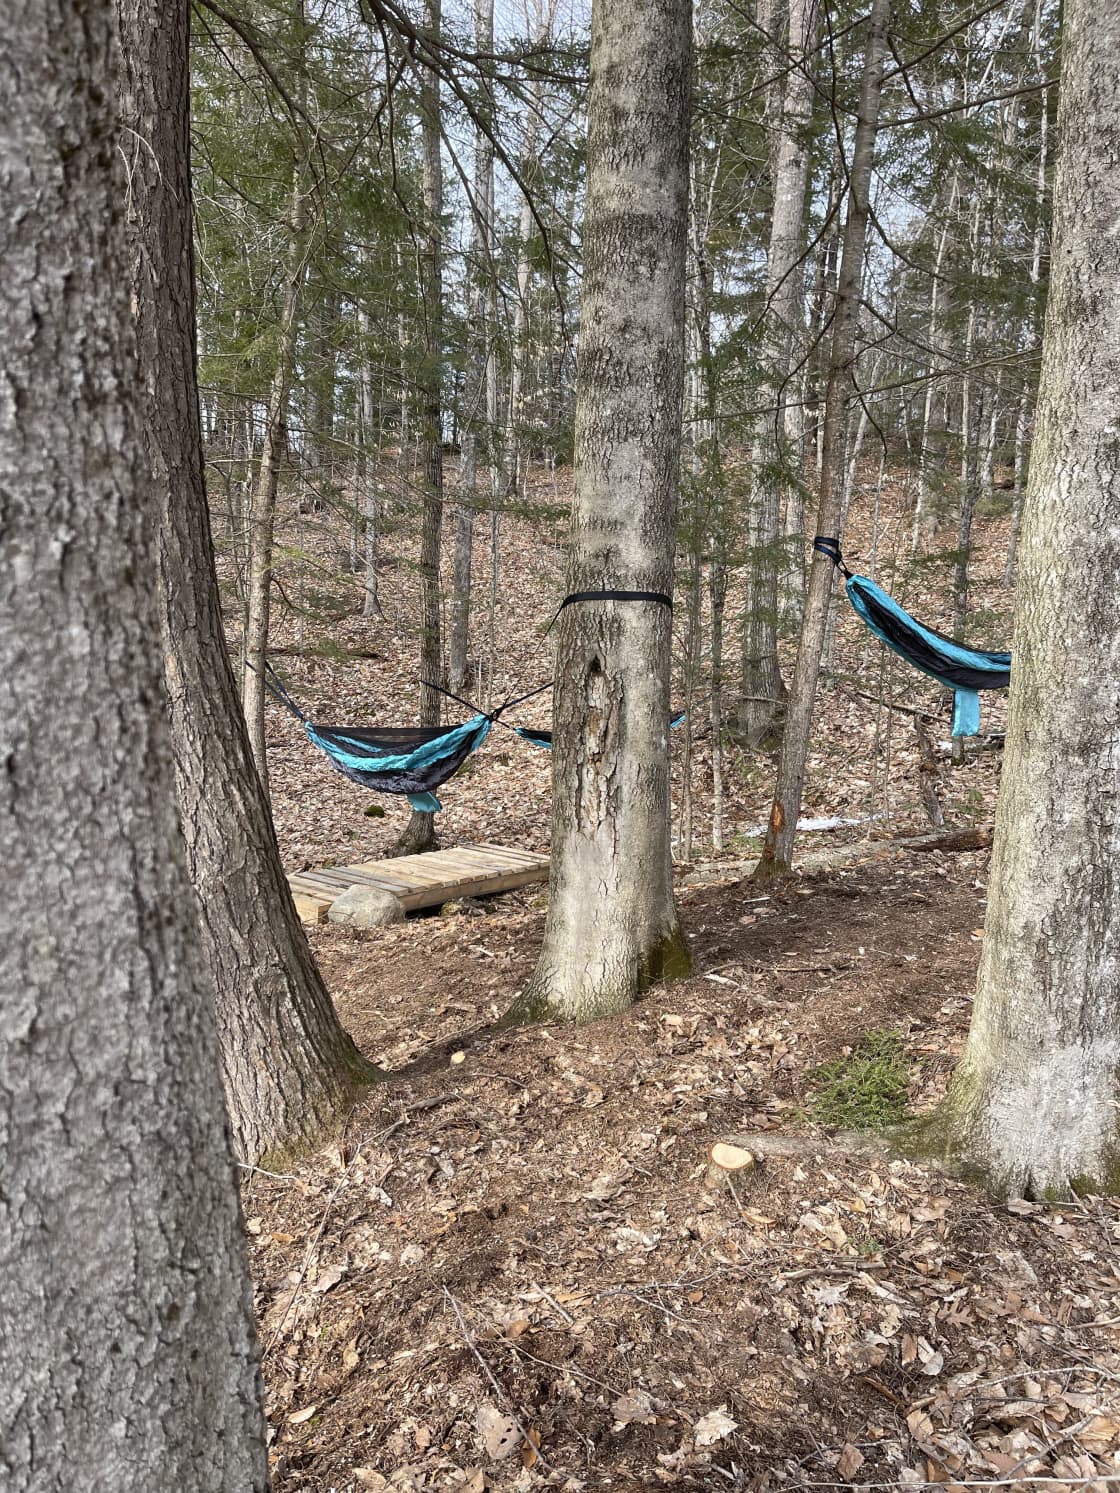 Great trees for hammocks.
We provide you with 3 hammocks.